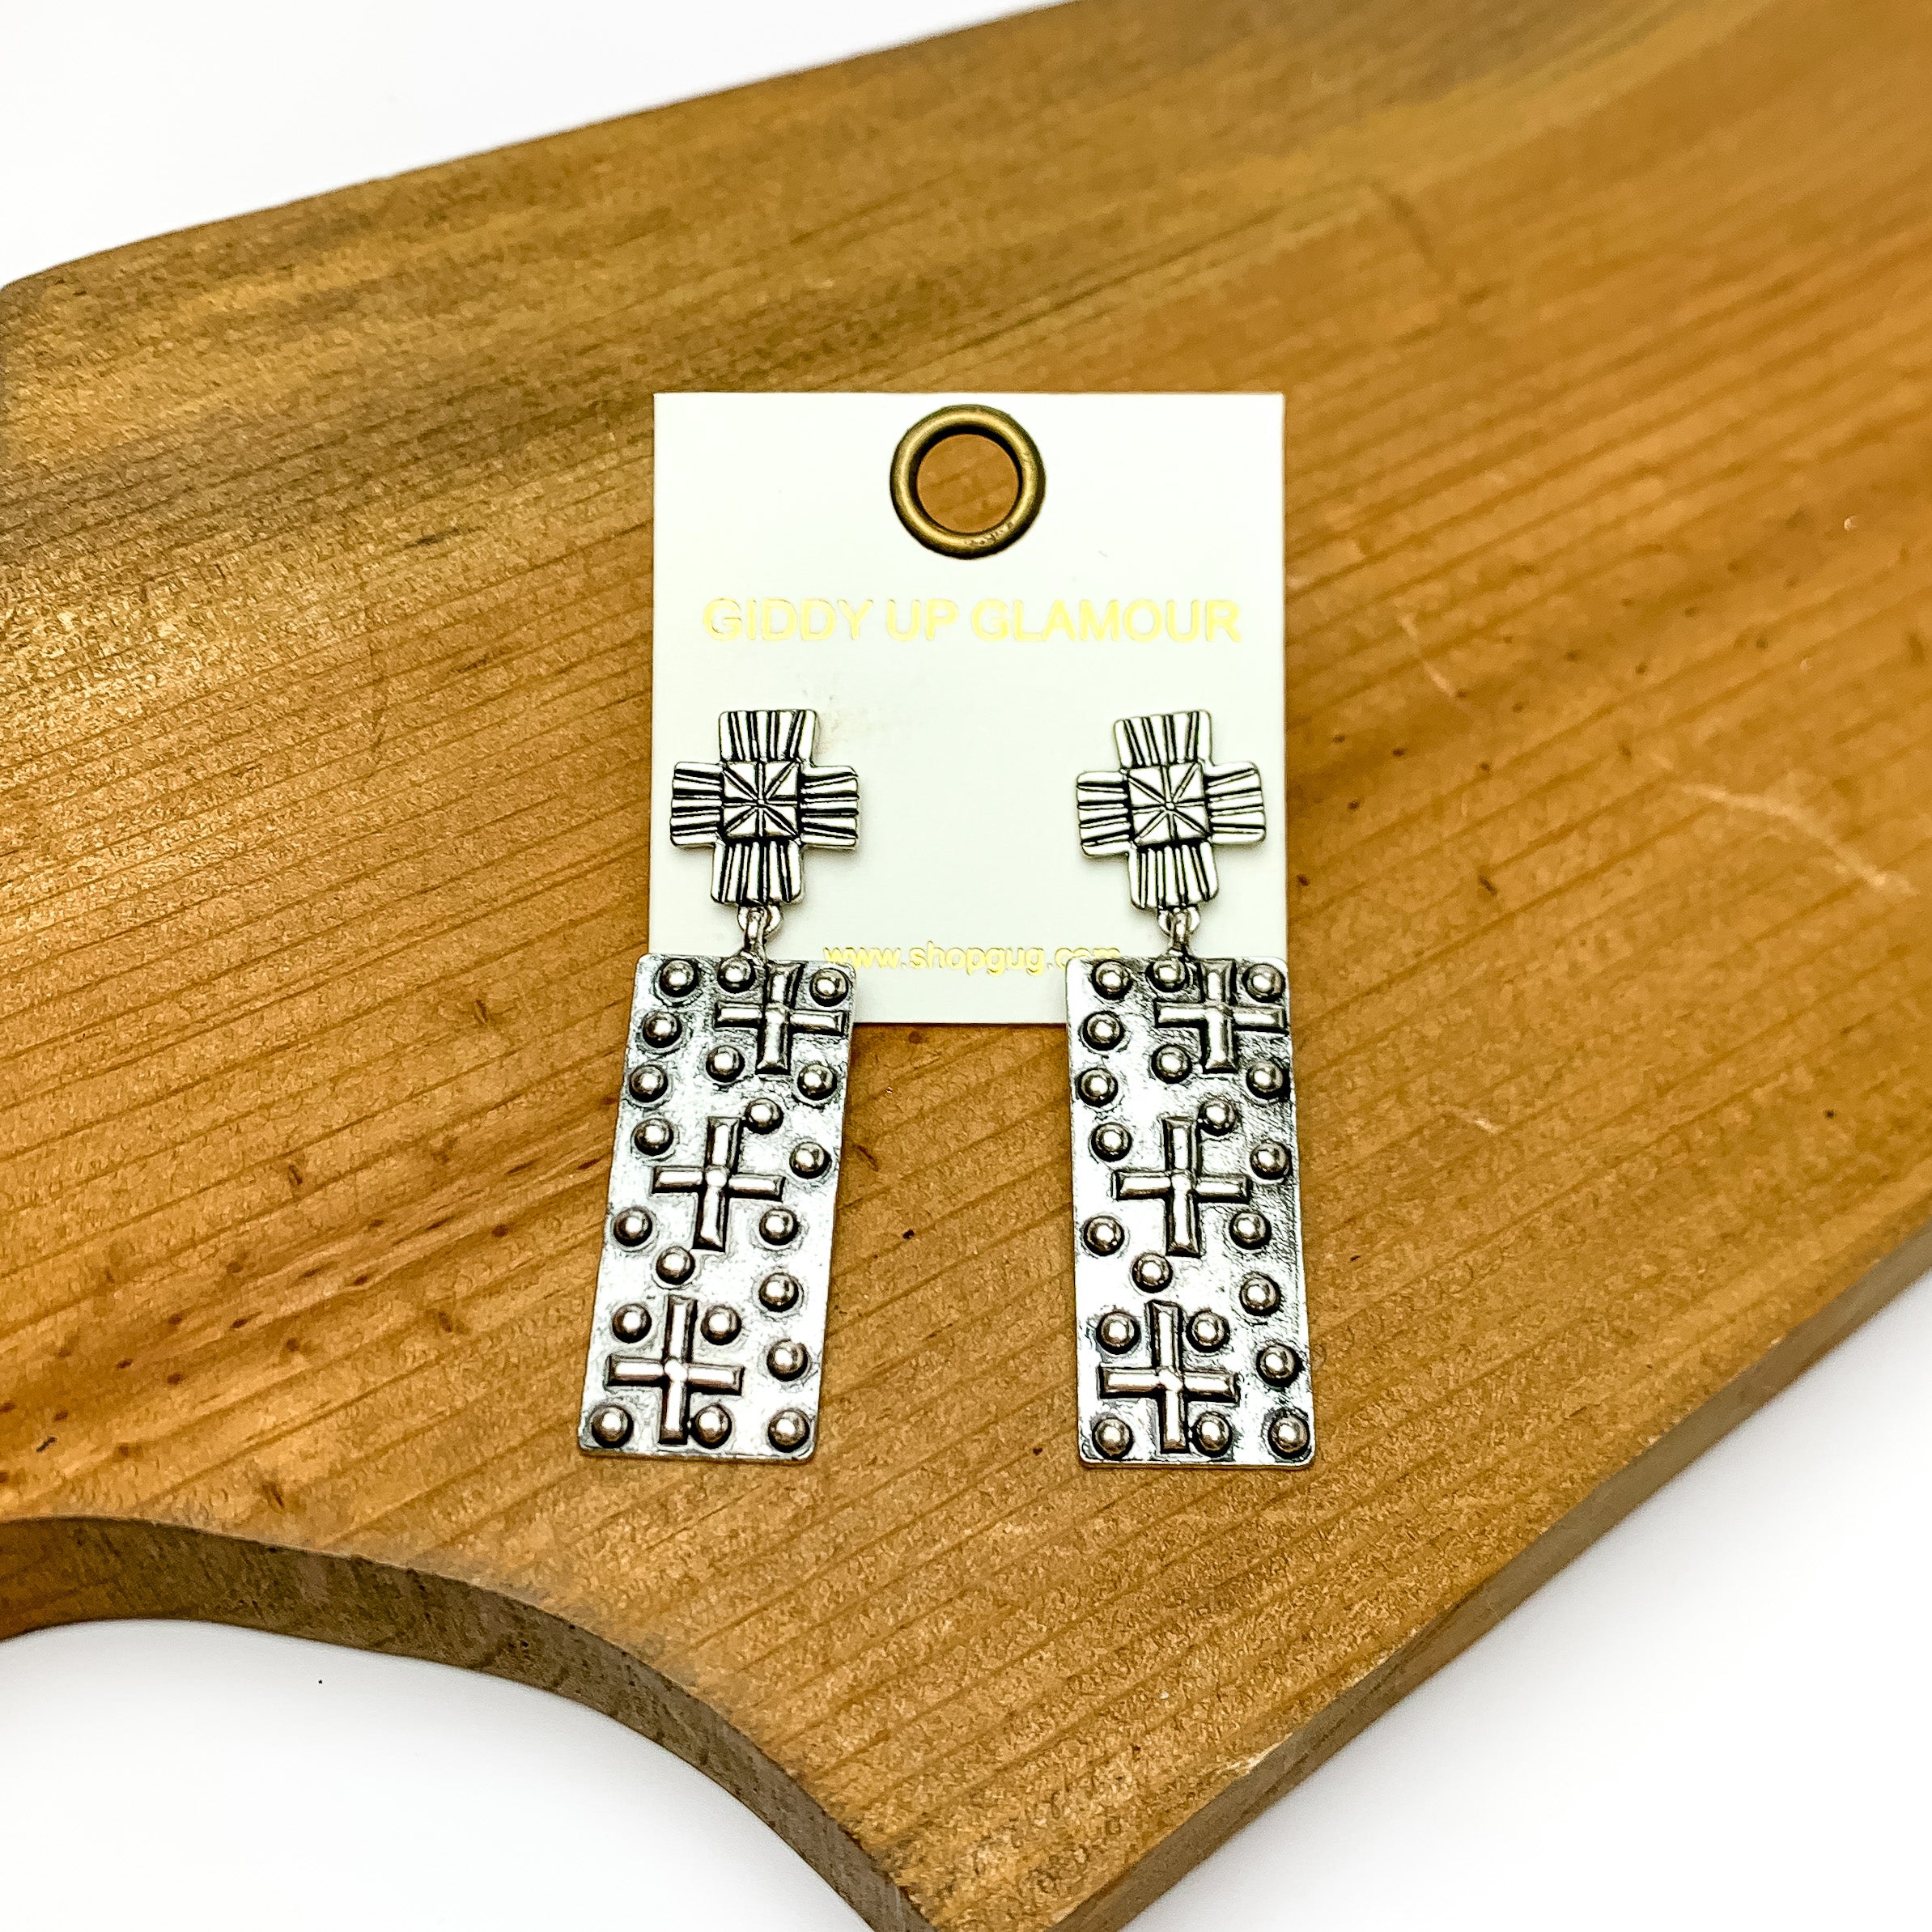 Silver tone rectangular earrings with crosses designed on them. Pictured on a piece of wood.